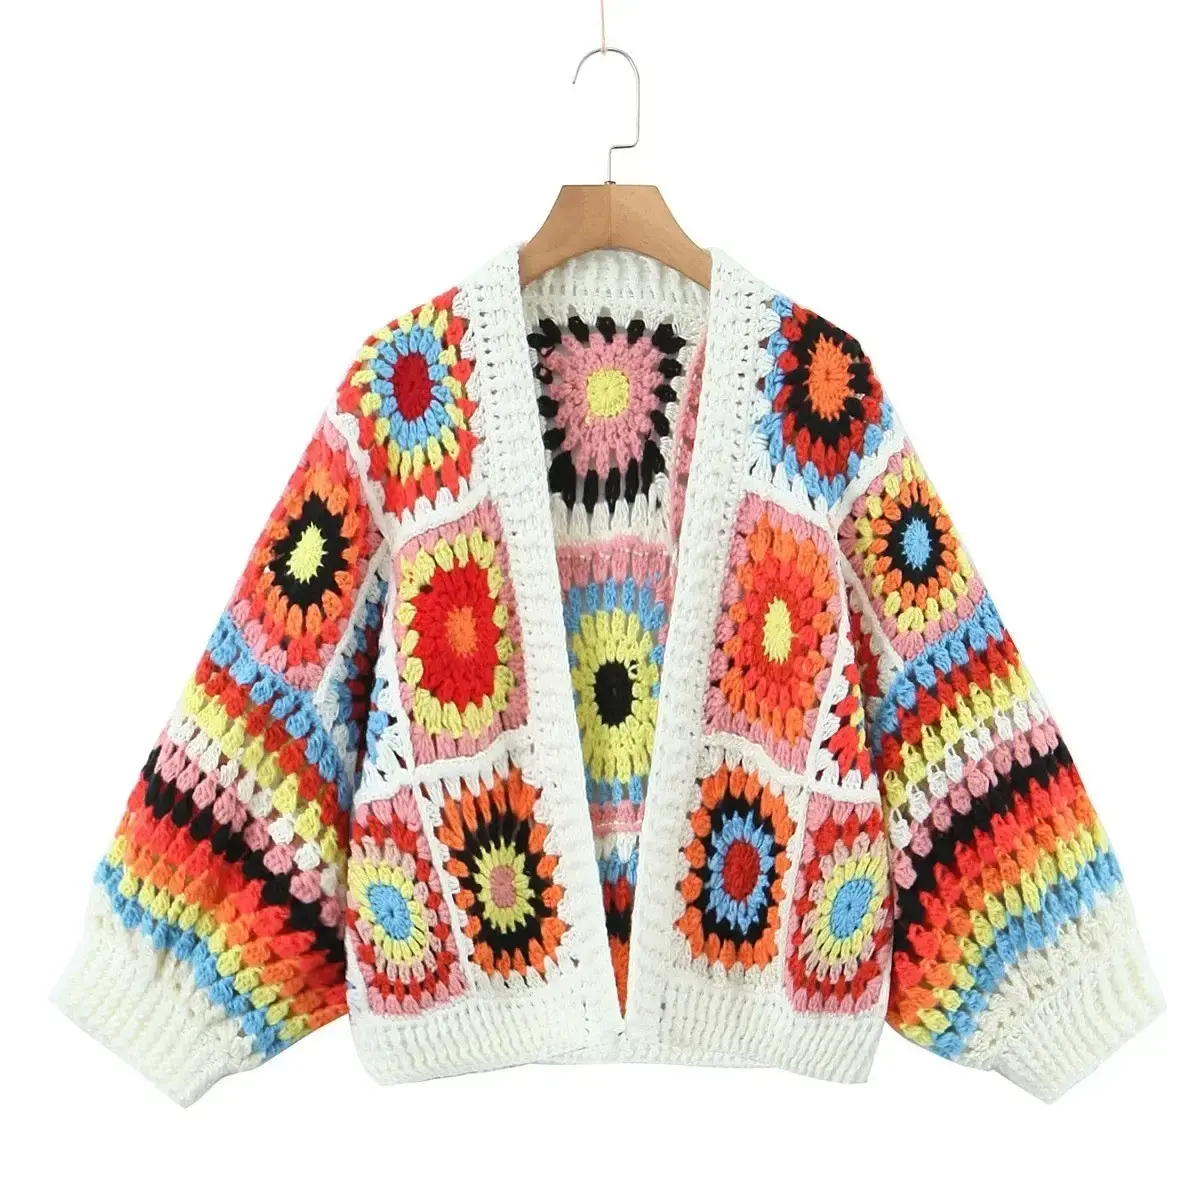 The Best High colorful women tops Cardigan knitted sweater Square Hand Crochet Plaid Pattern knitted jacket